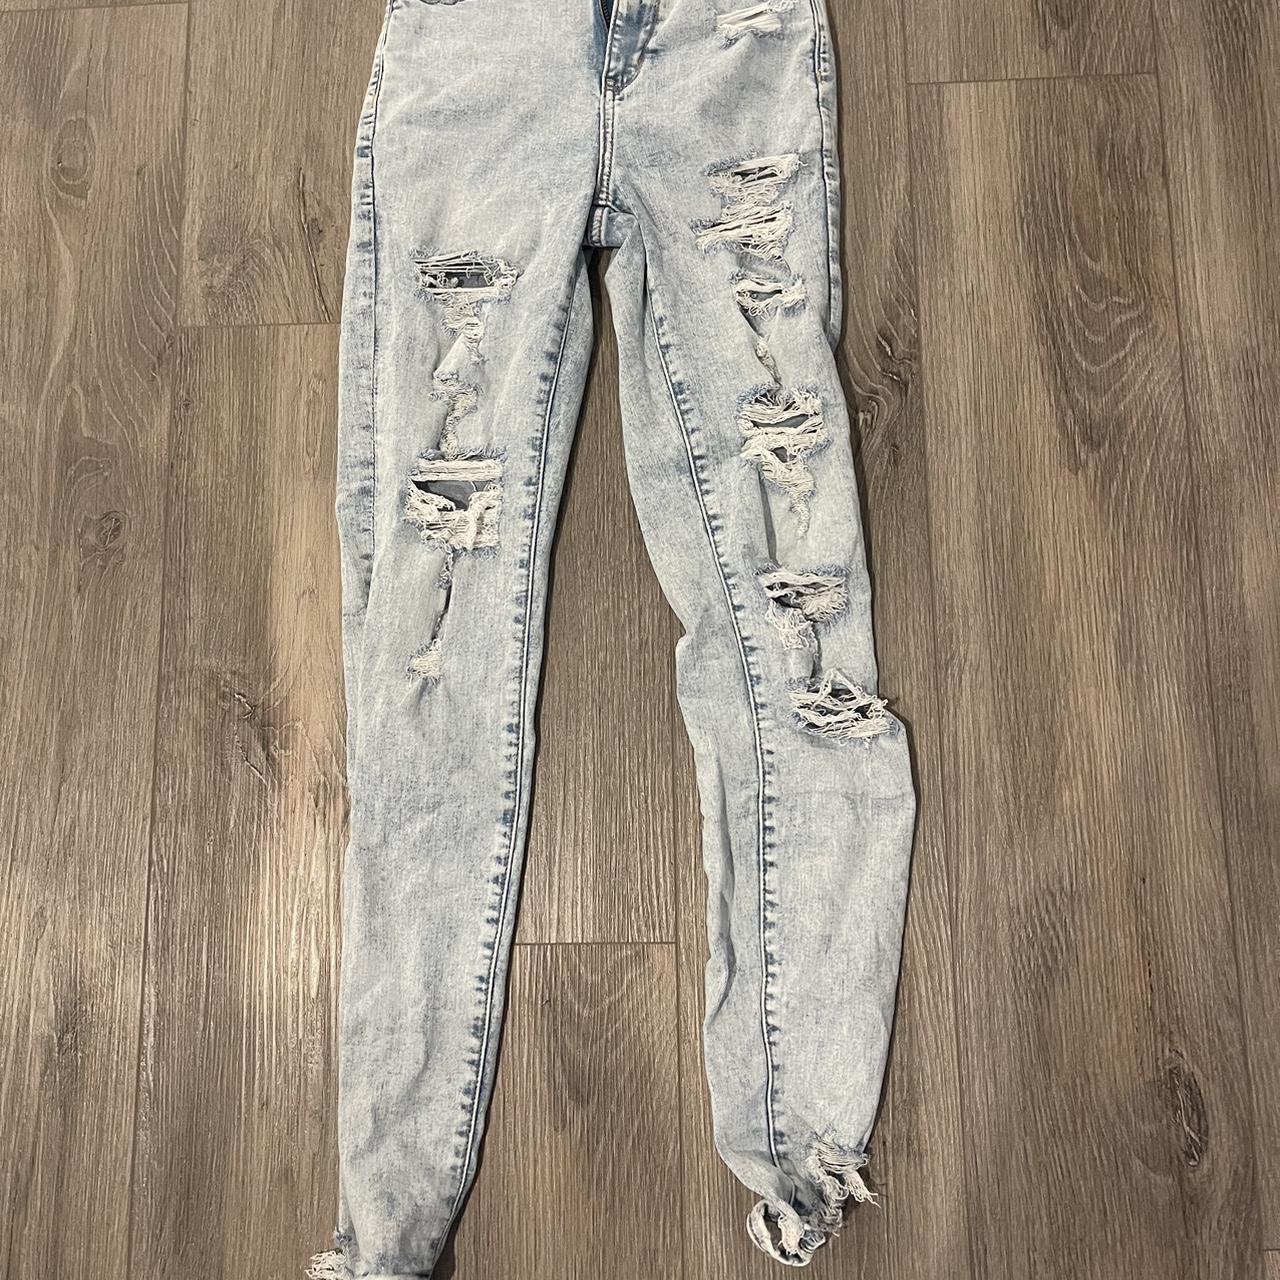 American Eagle ripped jeans! Size 0 long. No flaws.